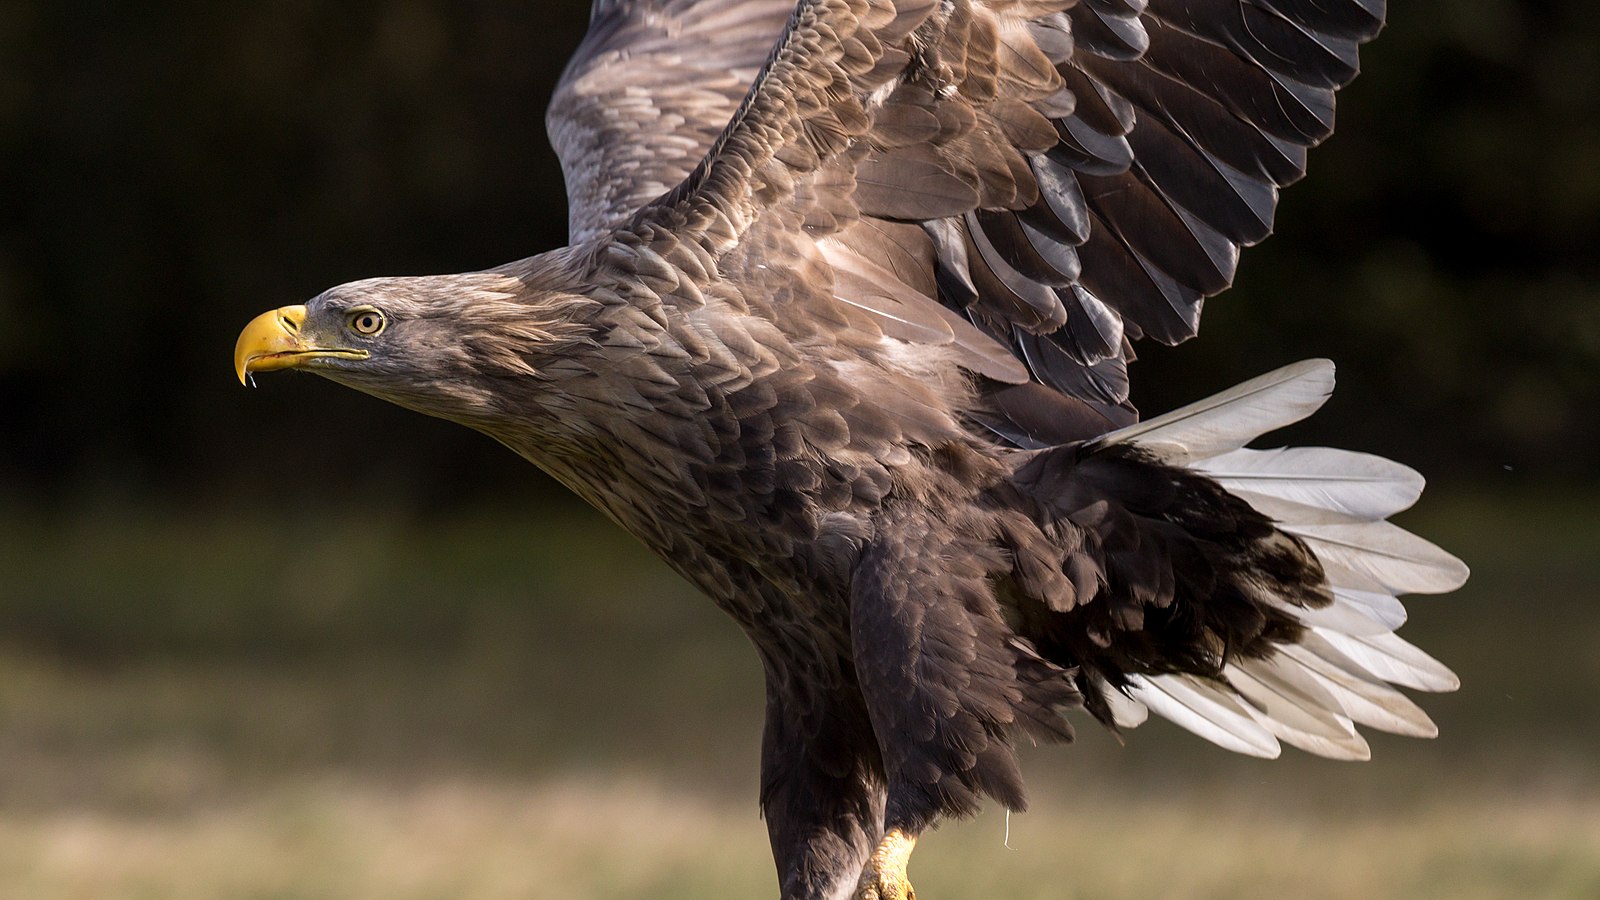 do white tailed eagles eat dead animals